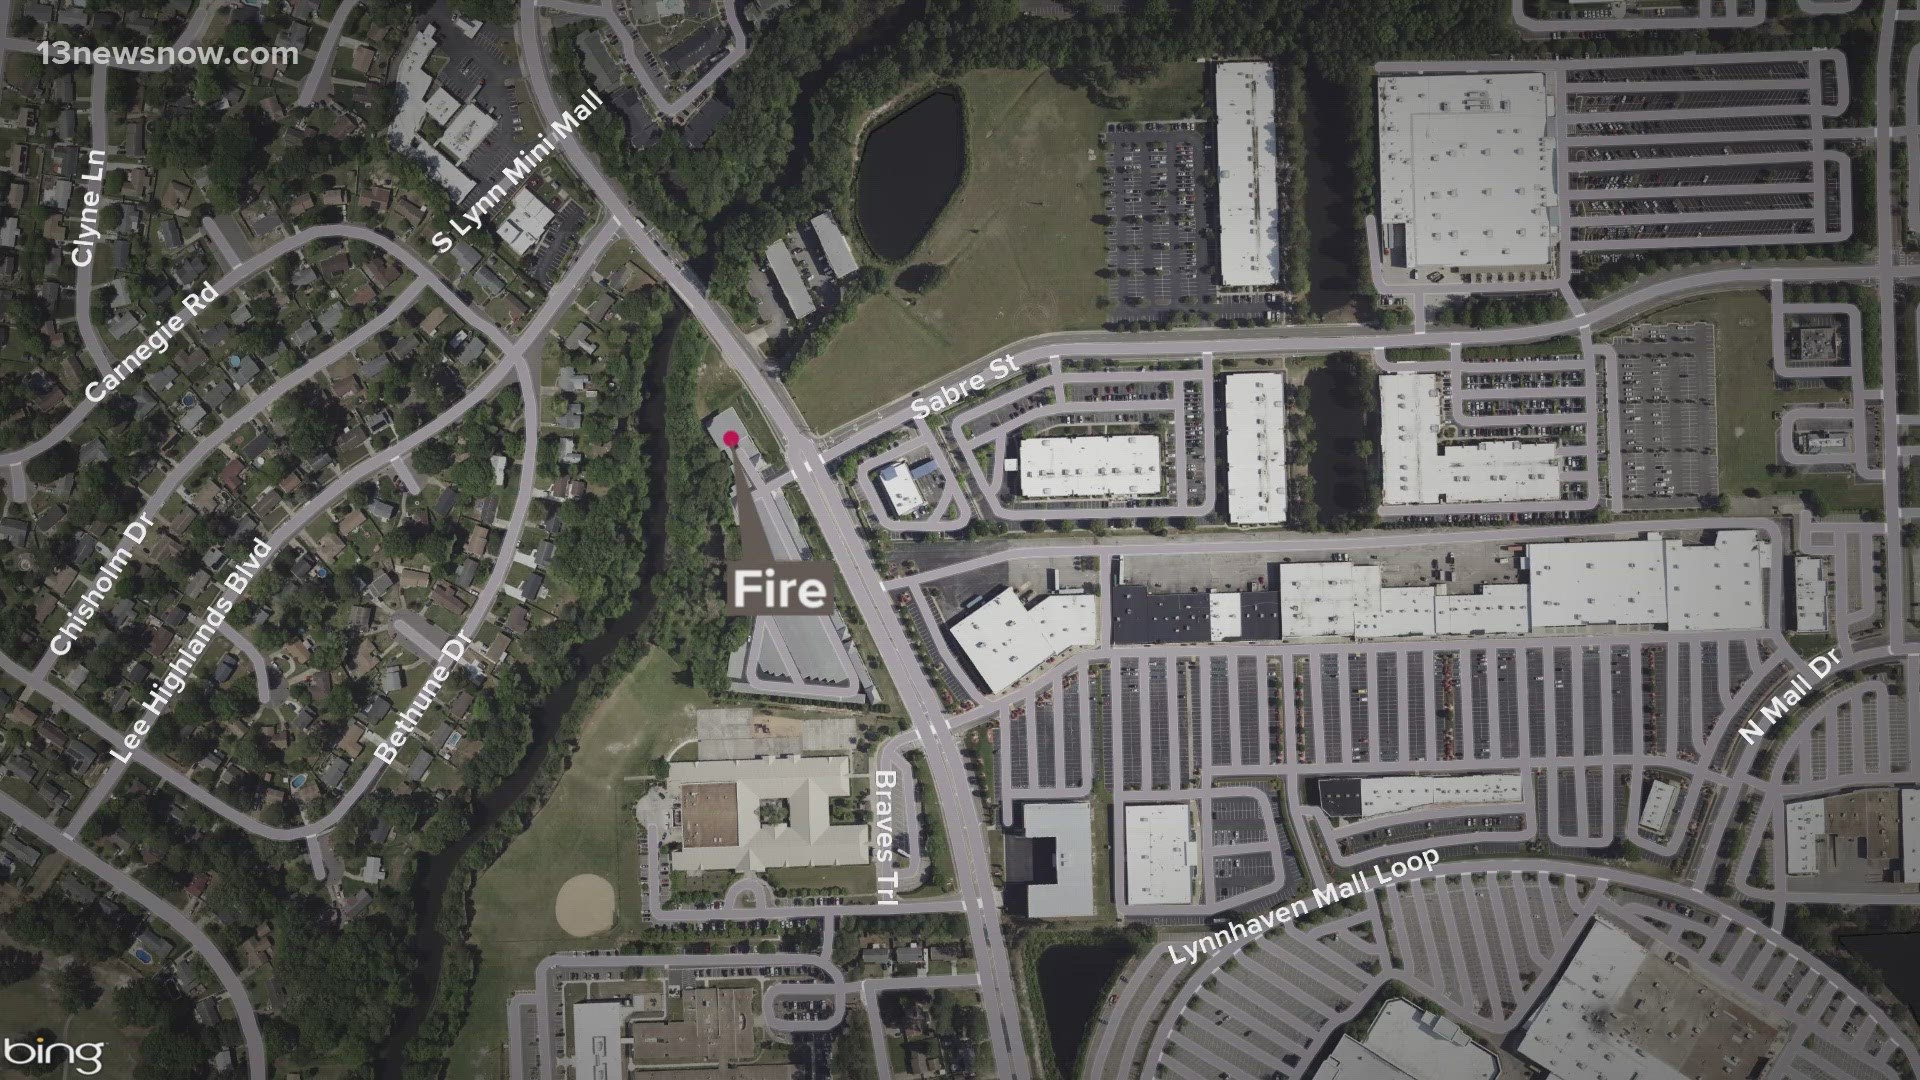 Firefighters are at the scene of a fire near Lynnhaven Mall Tuesday.